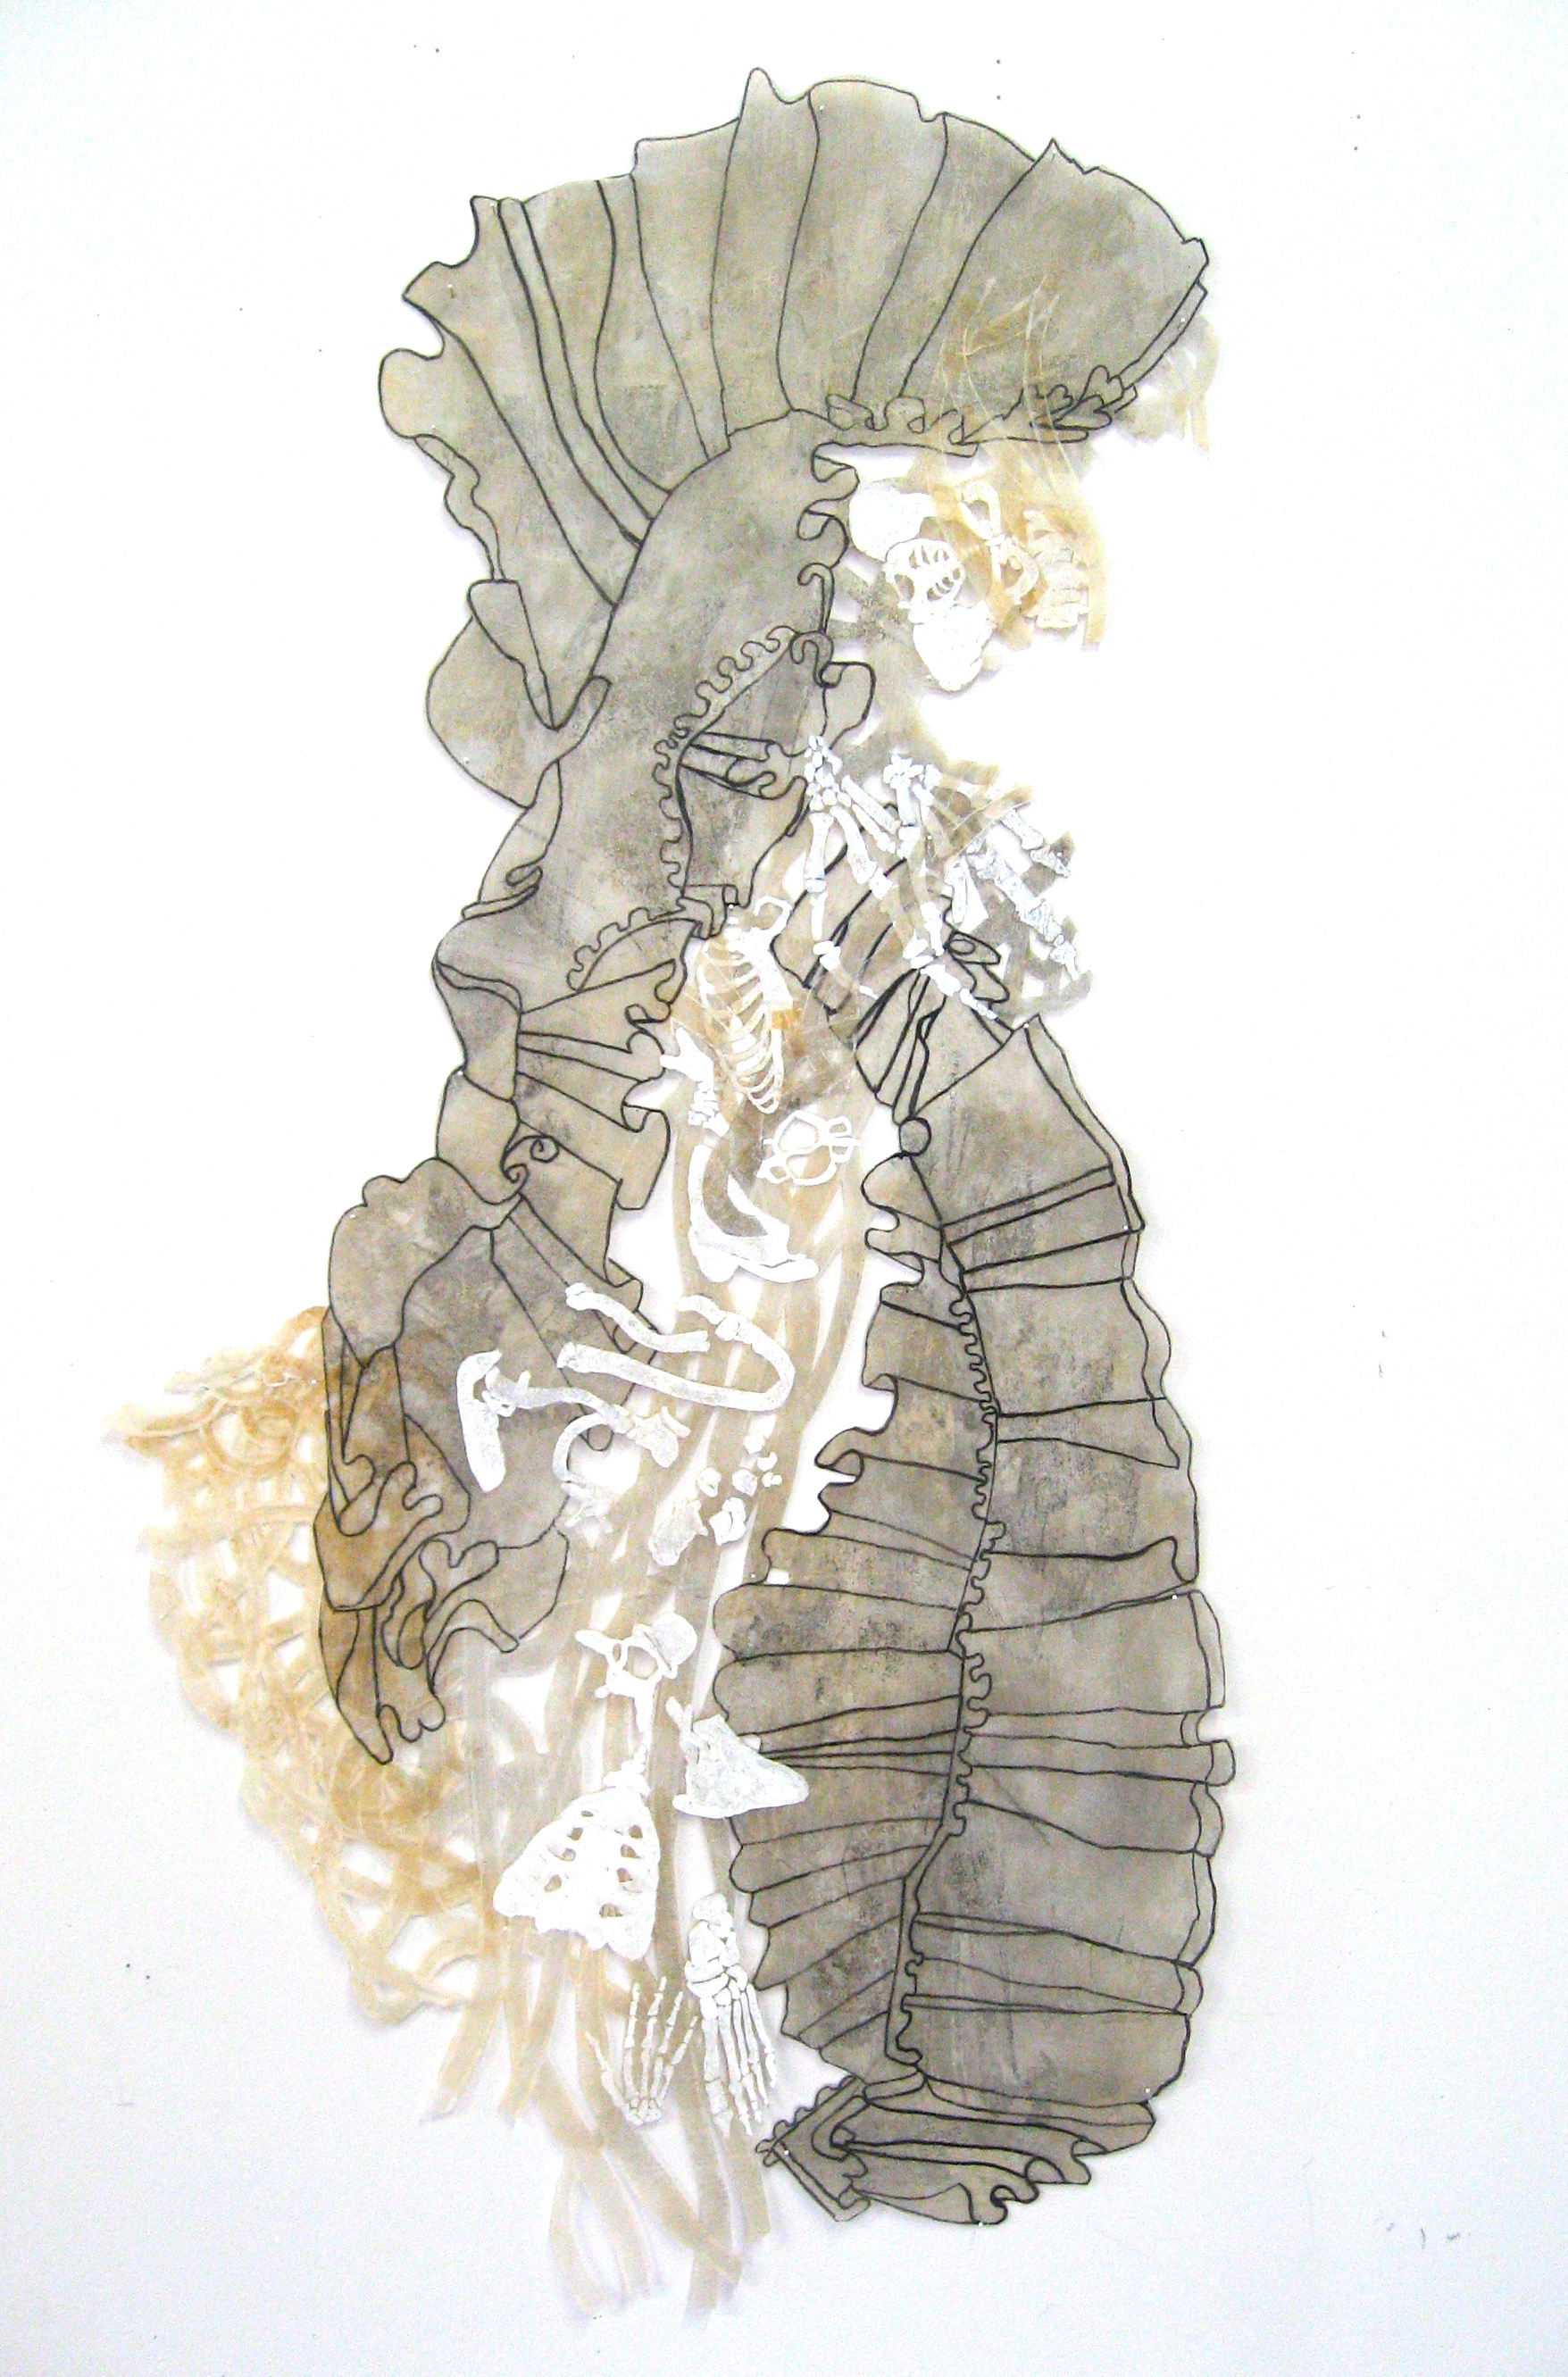  At Rest 36”x 17” natural dyes, ink, layered polyester 